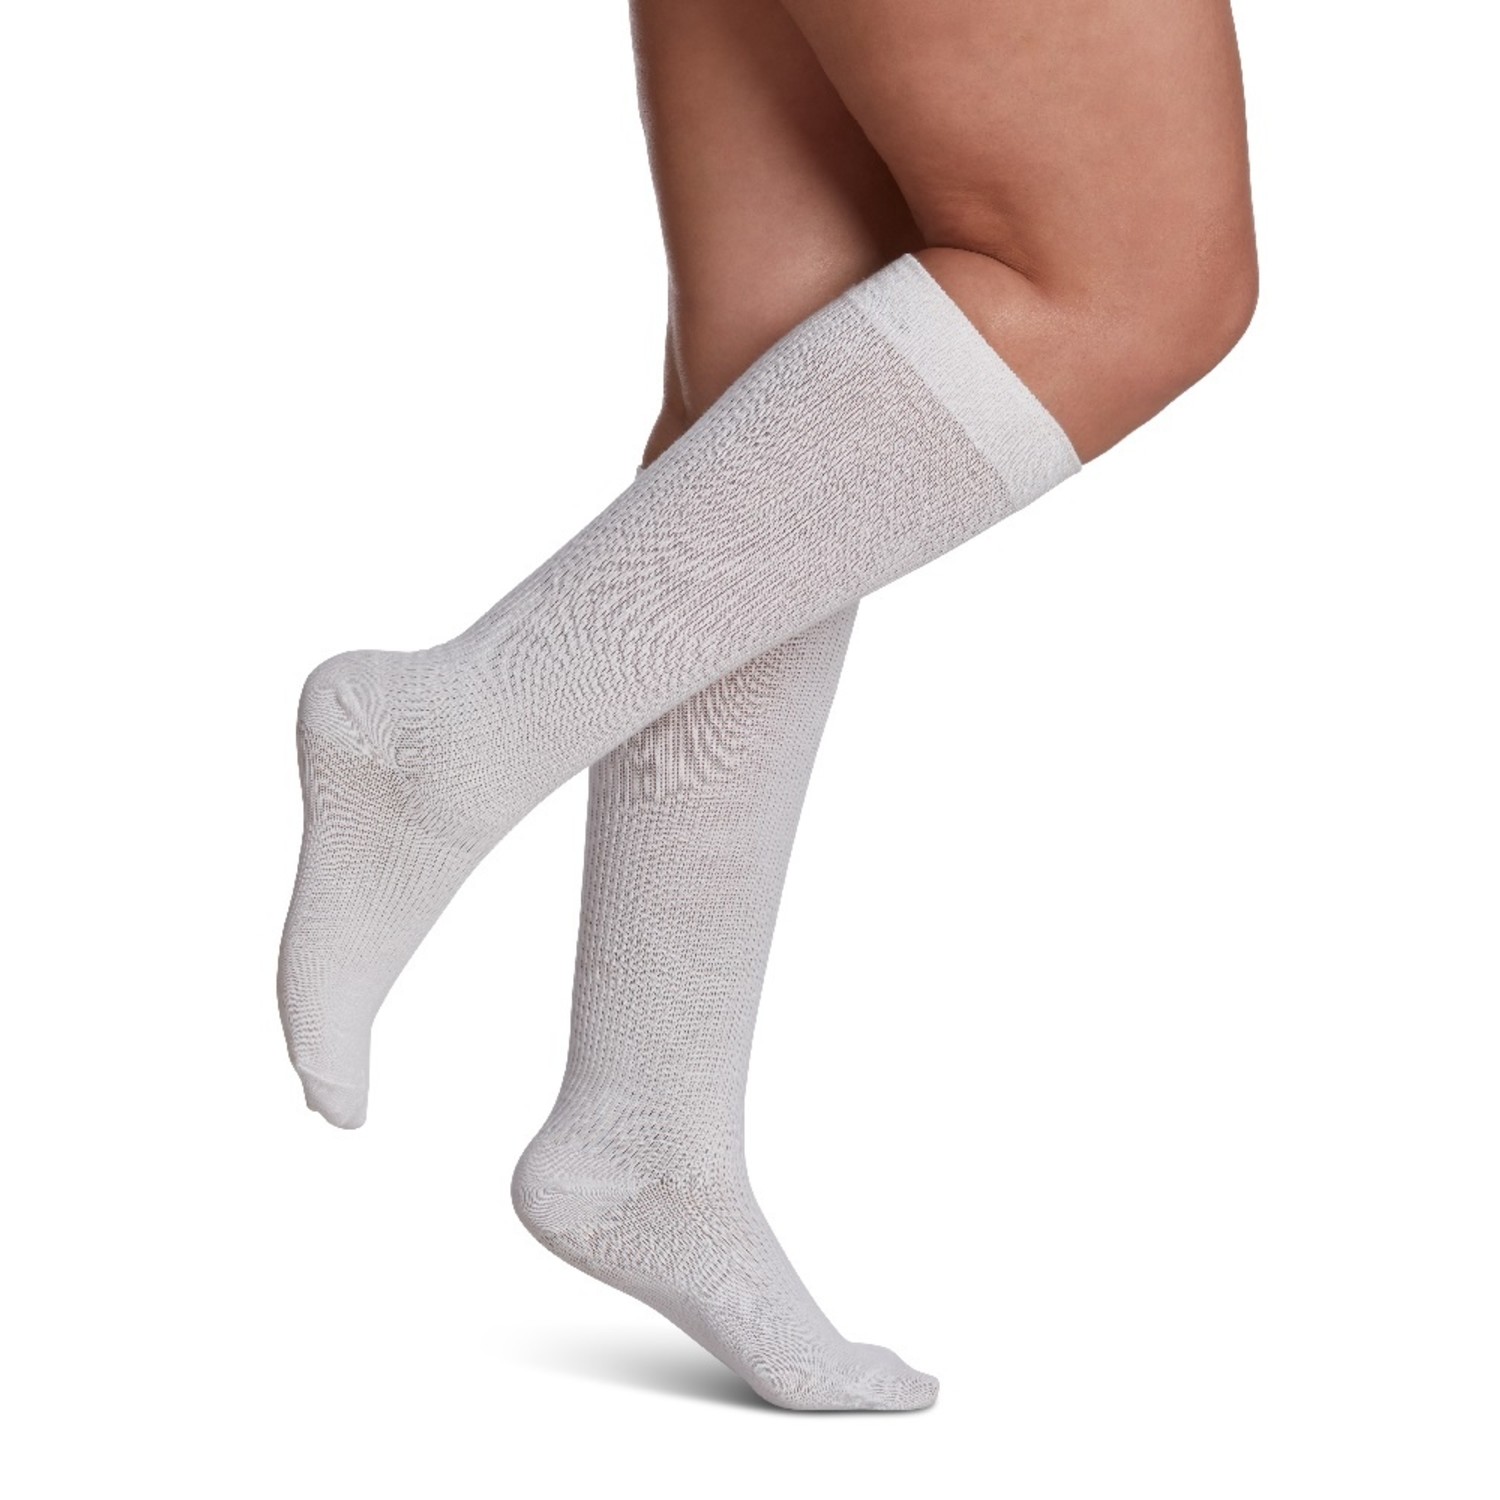 Sigvaris Cushioned Cotton Compression Socks 15-20 mmHg for Women